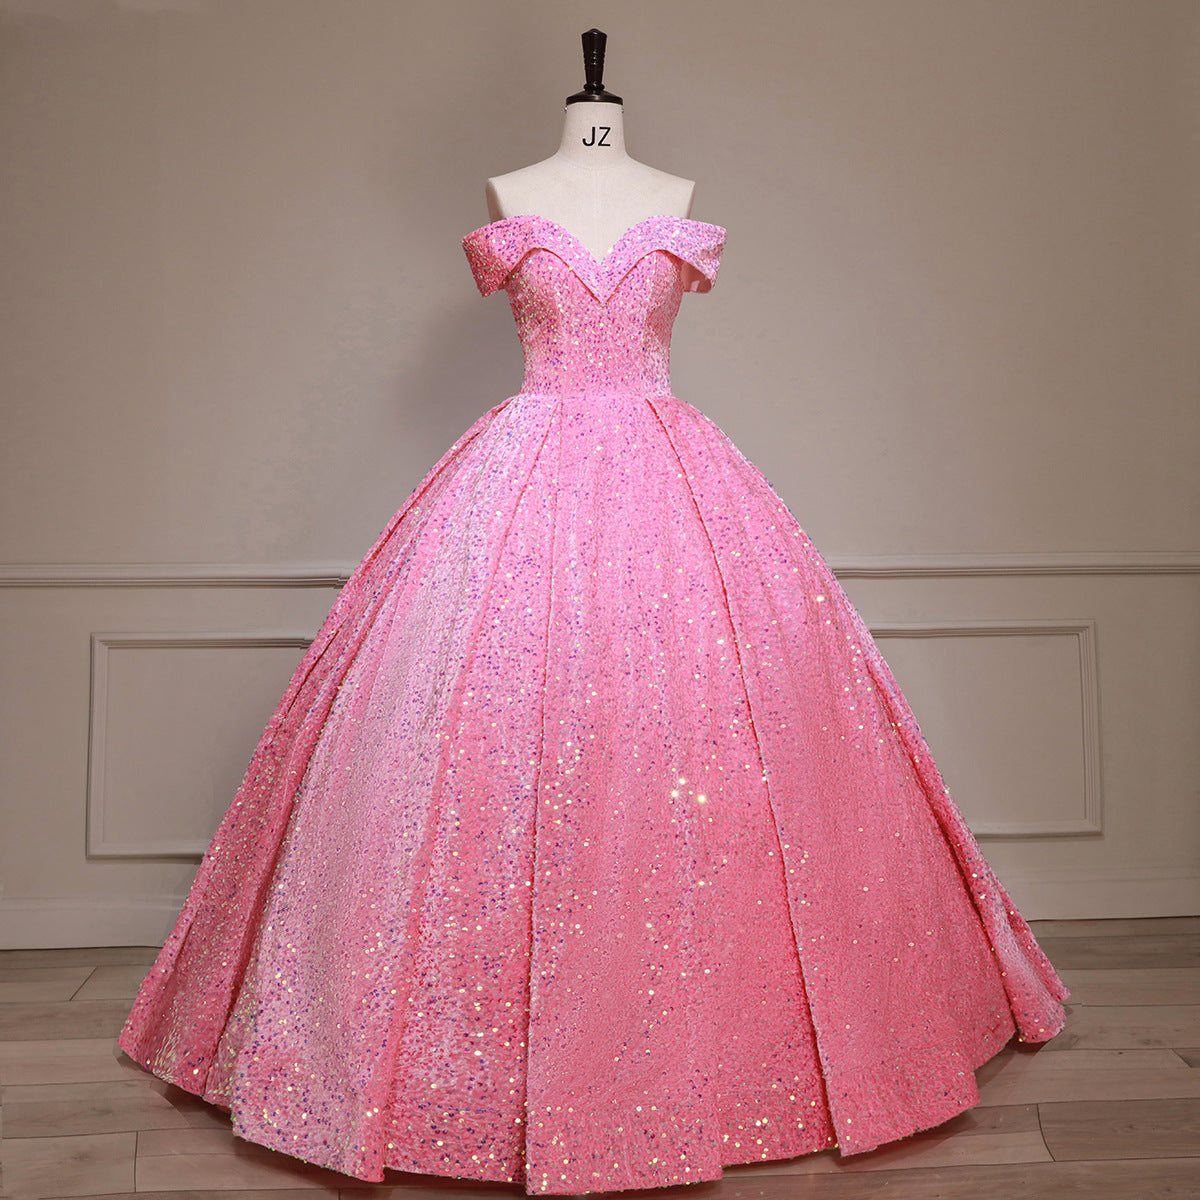 European and American Foreign Trade Bridal Wedding Dress Female  Color Change Sequins Ball Performance Costume off-Shoulder Pettiskirt Adult